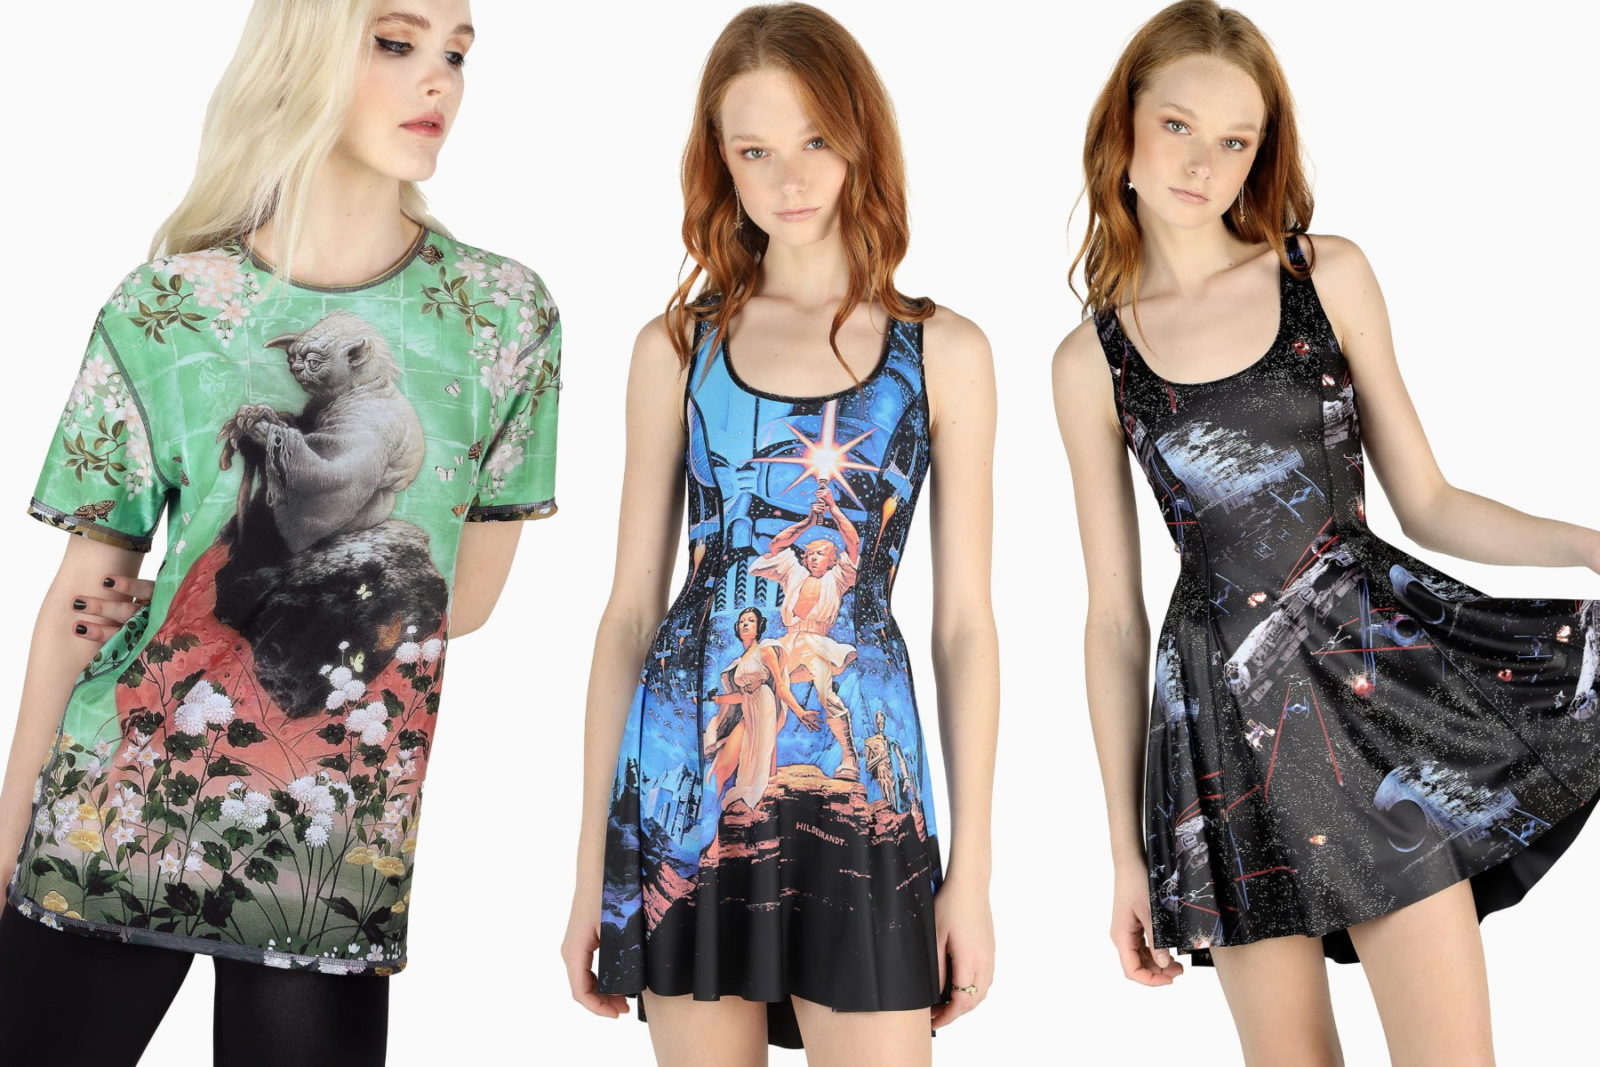 BlackMilk Clothing Star Wars Inside Out Collection